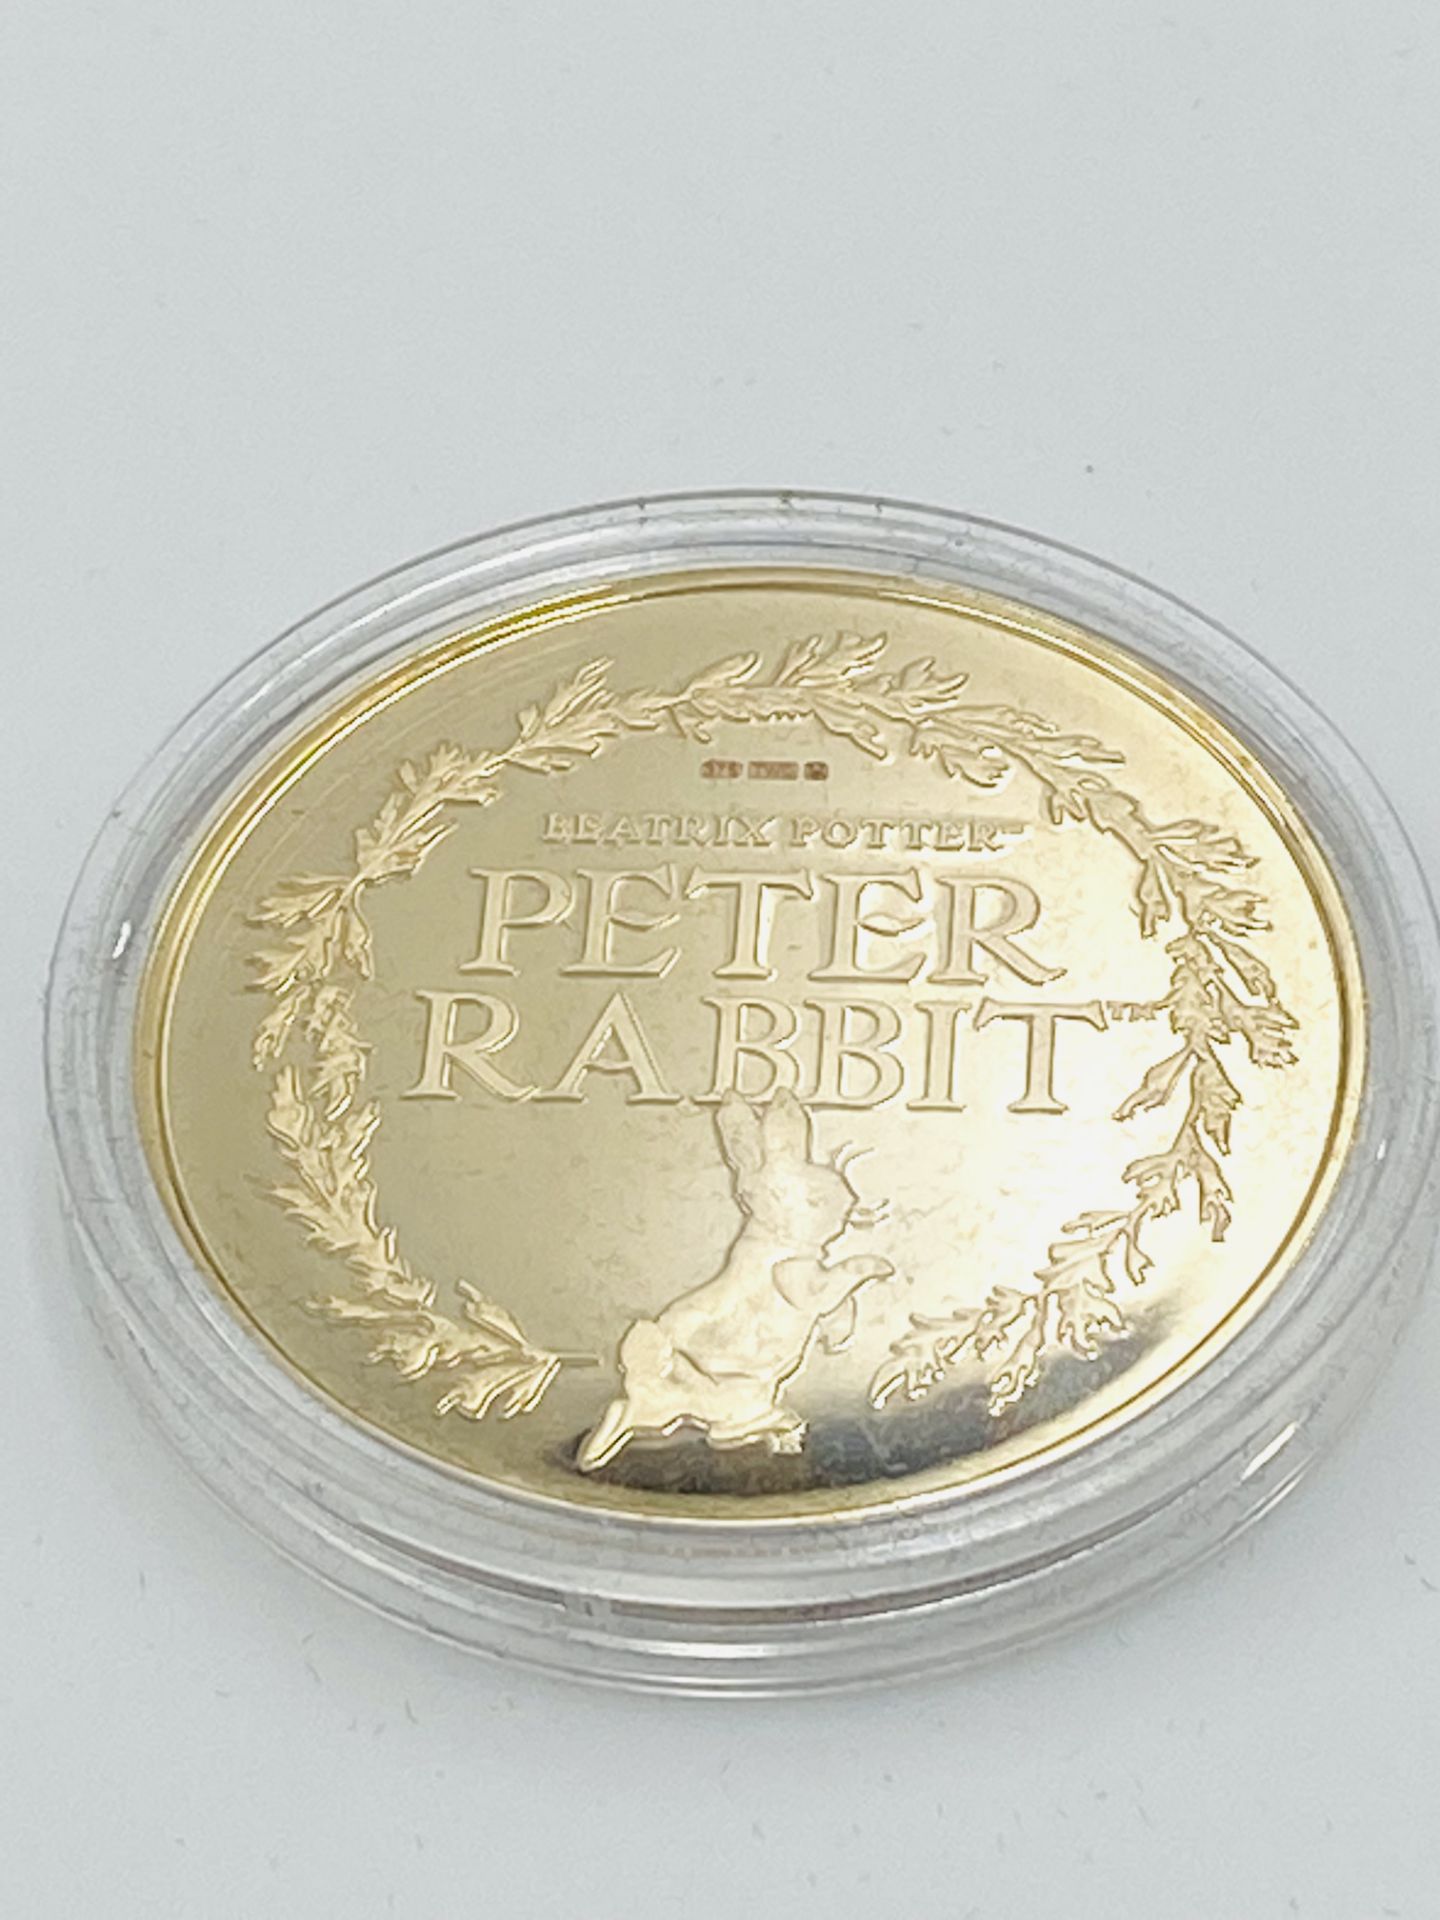 Mint Editions Limited Edition 10/30 "Peter Rabbit and the Christmas Wreath" Gold Medal - Image 3 of 4